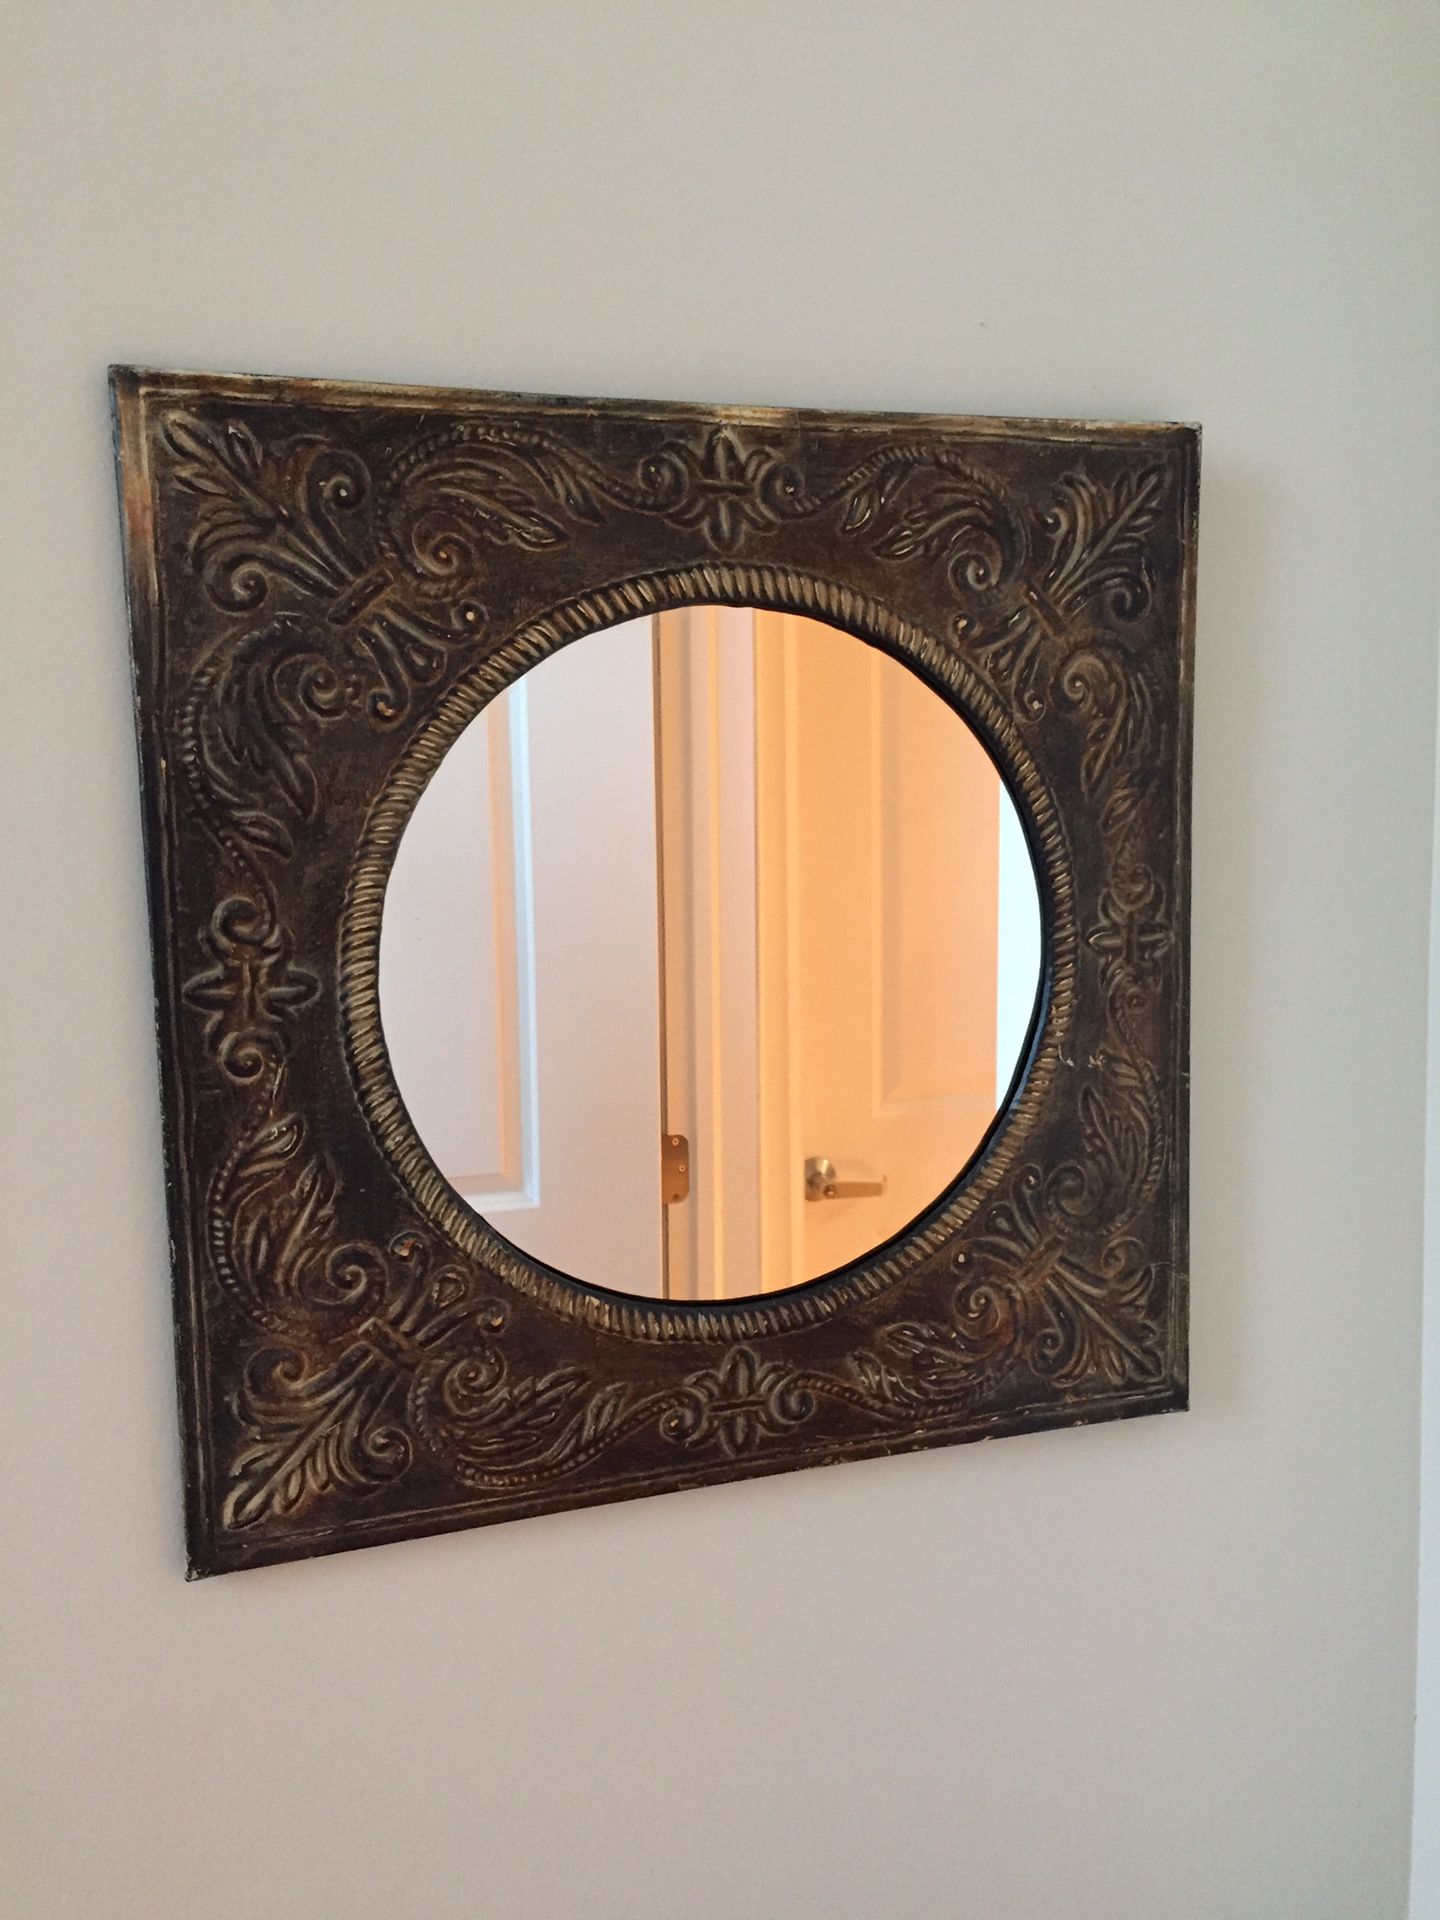 Antique mirror 11” in diameter. Metal frame 16.5” x 16.5”. Made in India. You can hang it in two different ways. Like new condition.